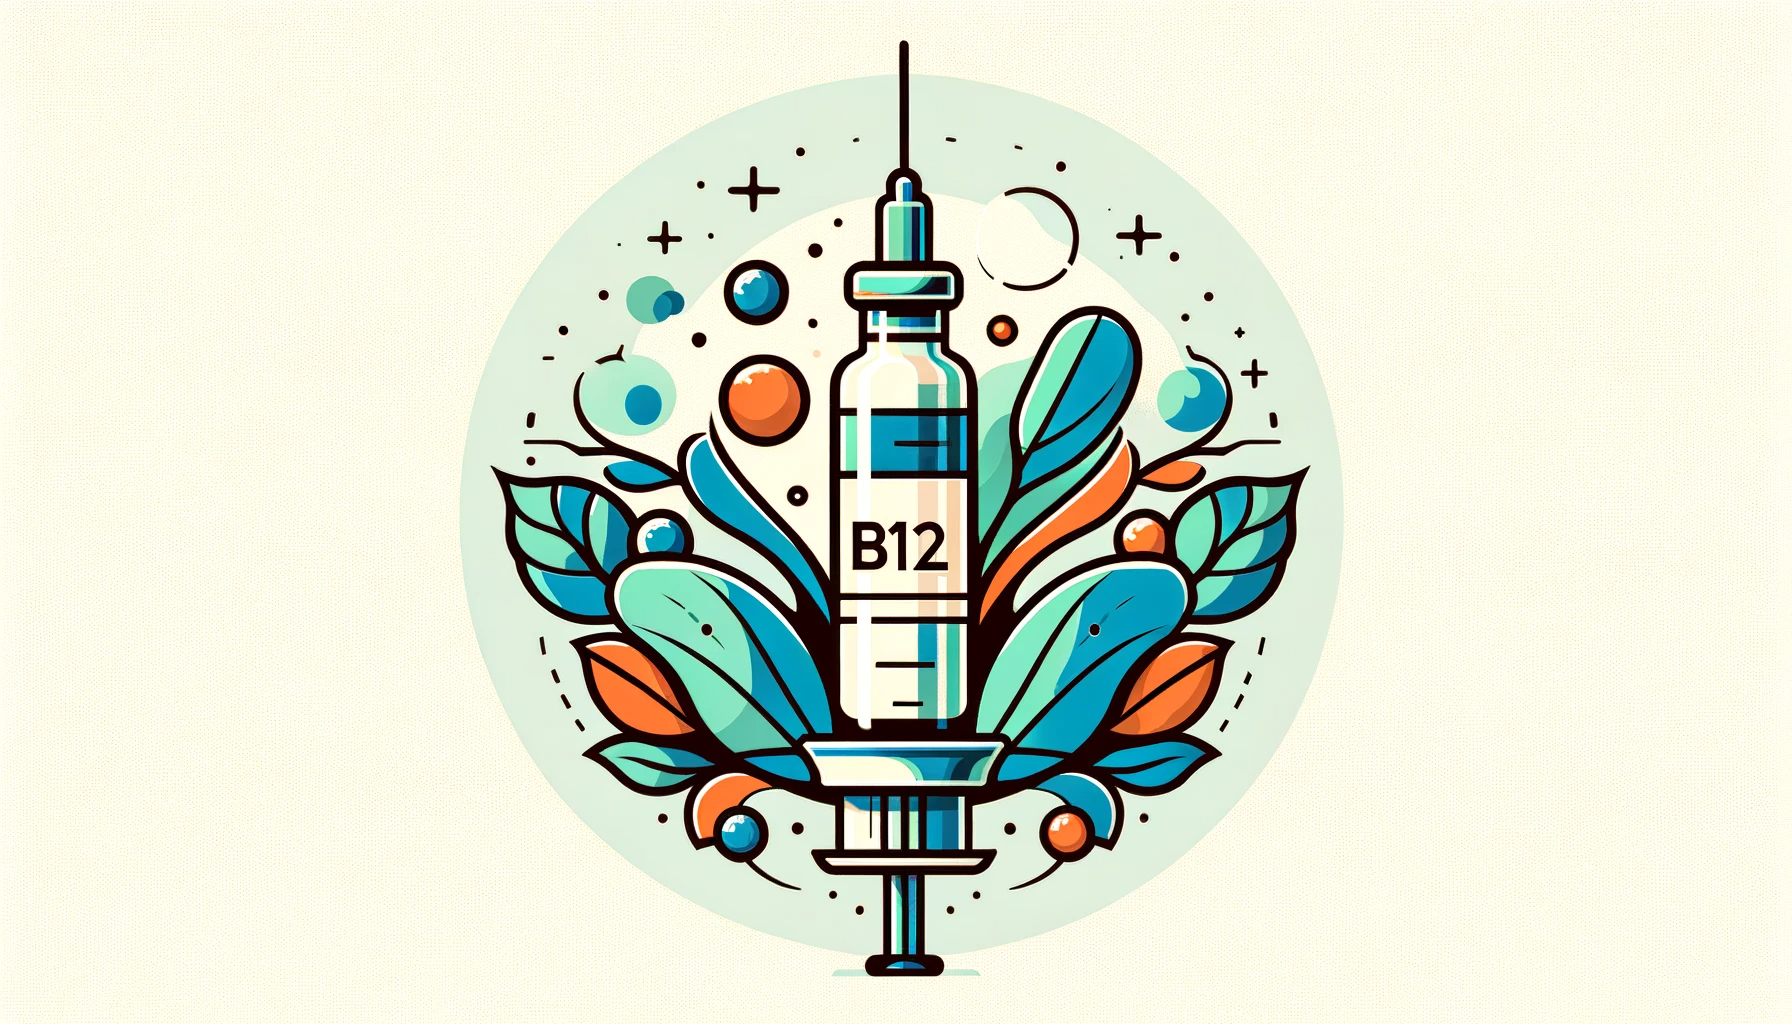 b12 shots for weight loss